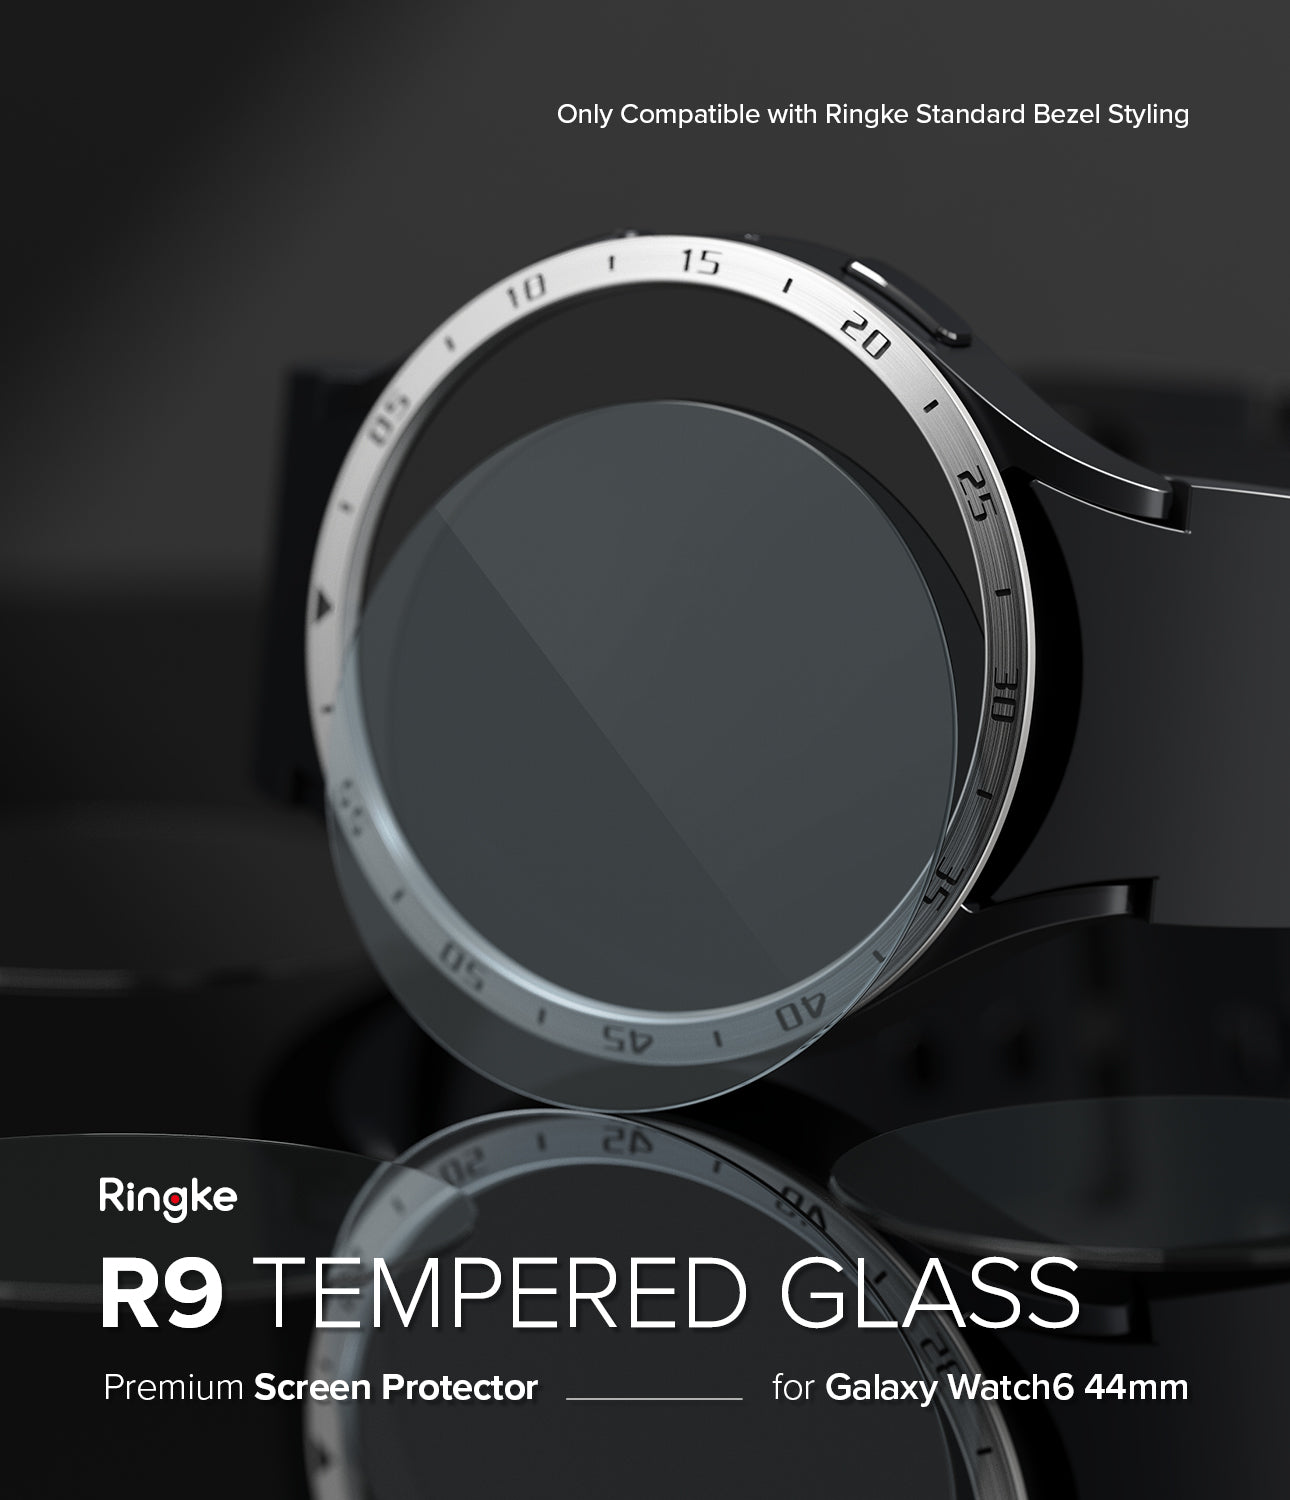 Galaxy Watch 6 44mm Screen Protector for Bezel Styling | Glass - R9